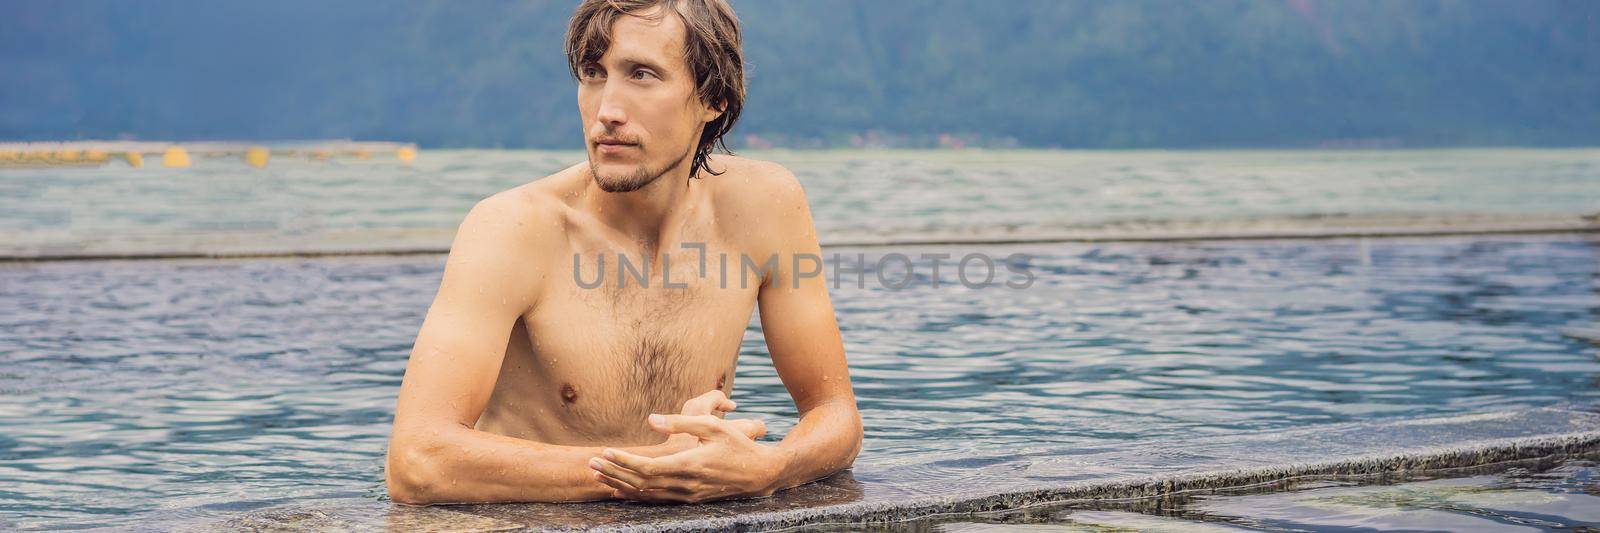 Geothermal spa. Man relaxing in hot spring pool. Young man enjoying bathing relaxed in a blue water lagoon, tourist attraction. BANNER, LONG FORMAT